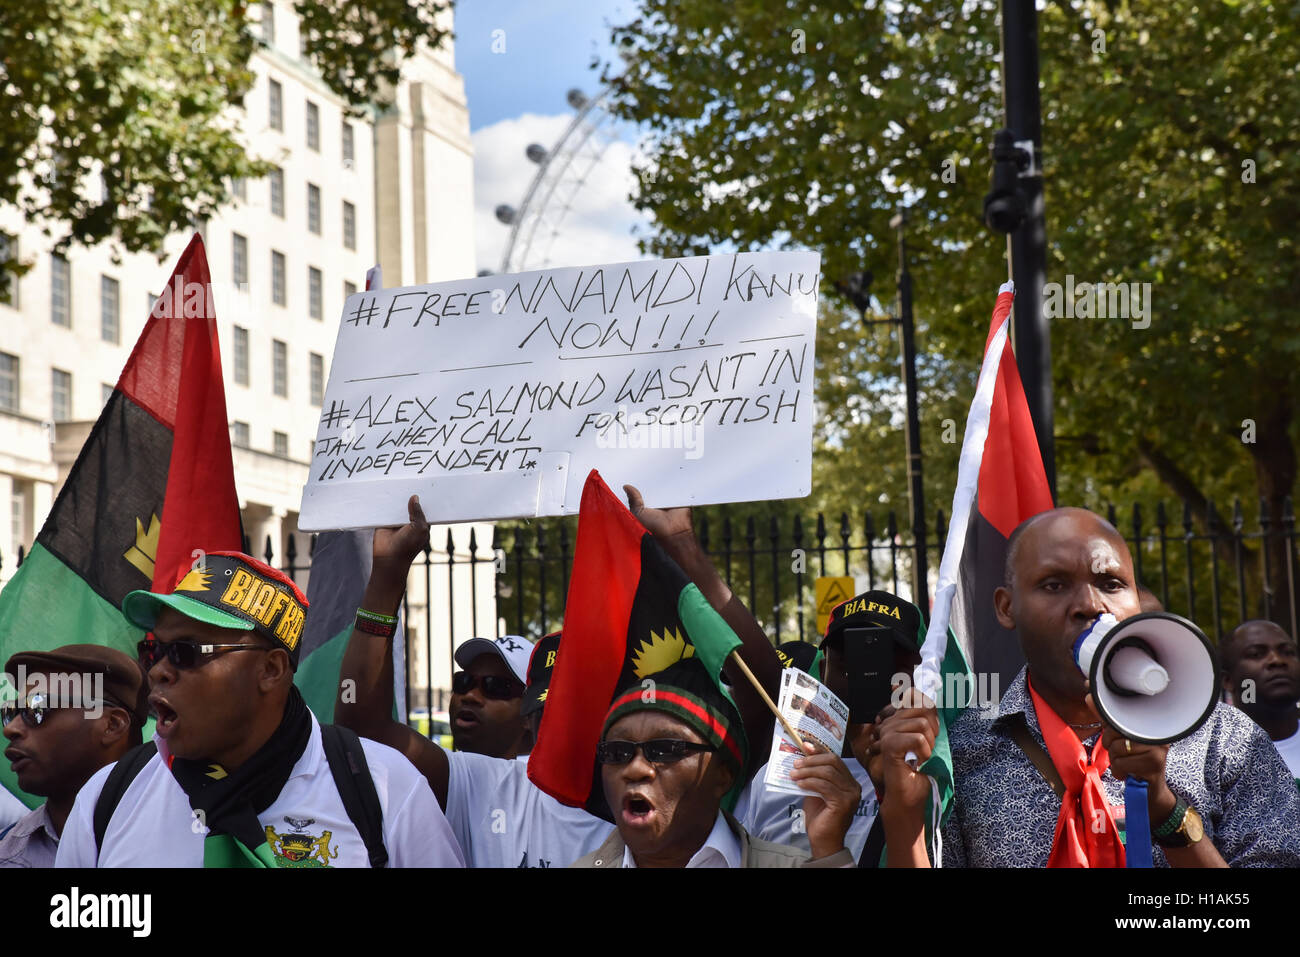 Whitehall, London, UK. 23rd September 2016. Biafran supporters of Nnamdi Kanu stage a protest on Whitehall. © Matthew Chattle/Al Stock Photo